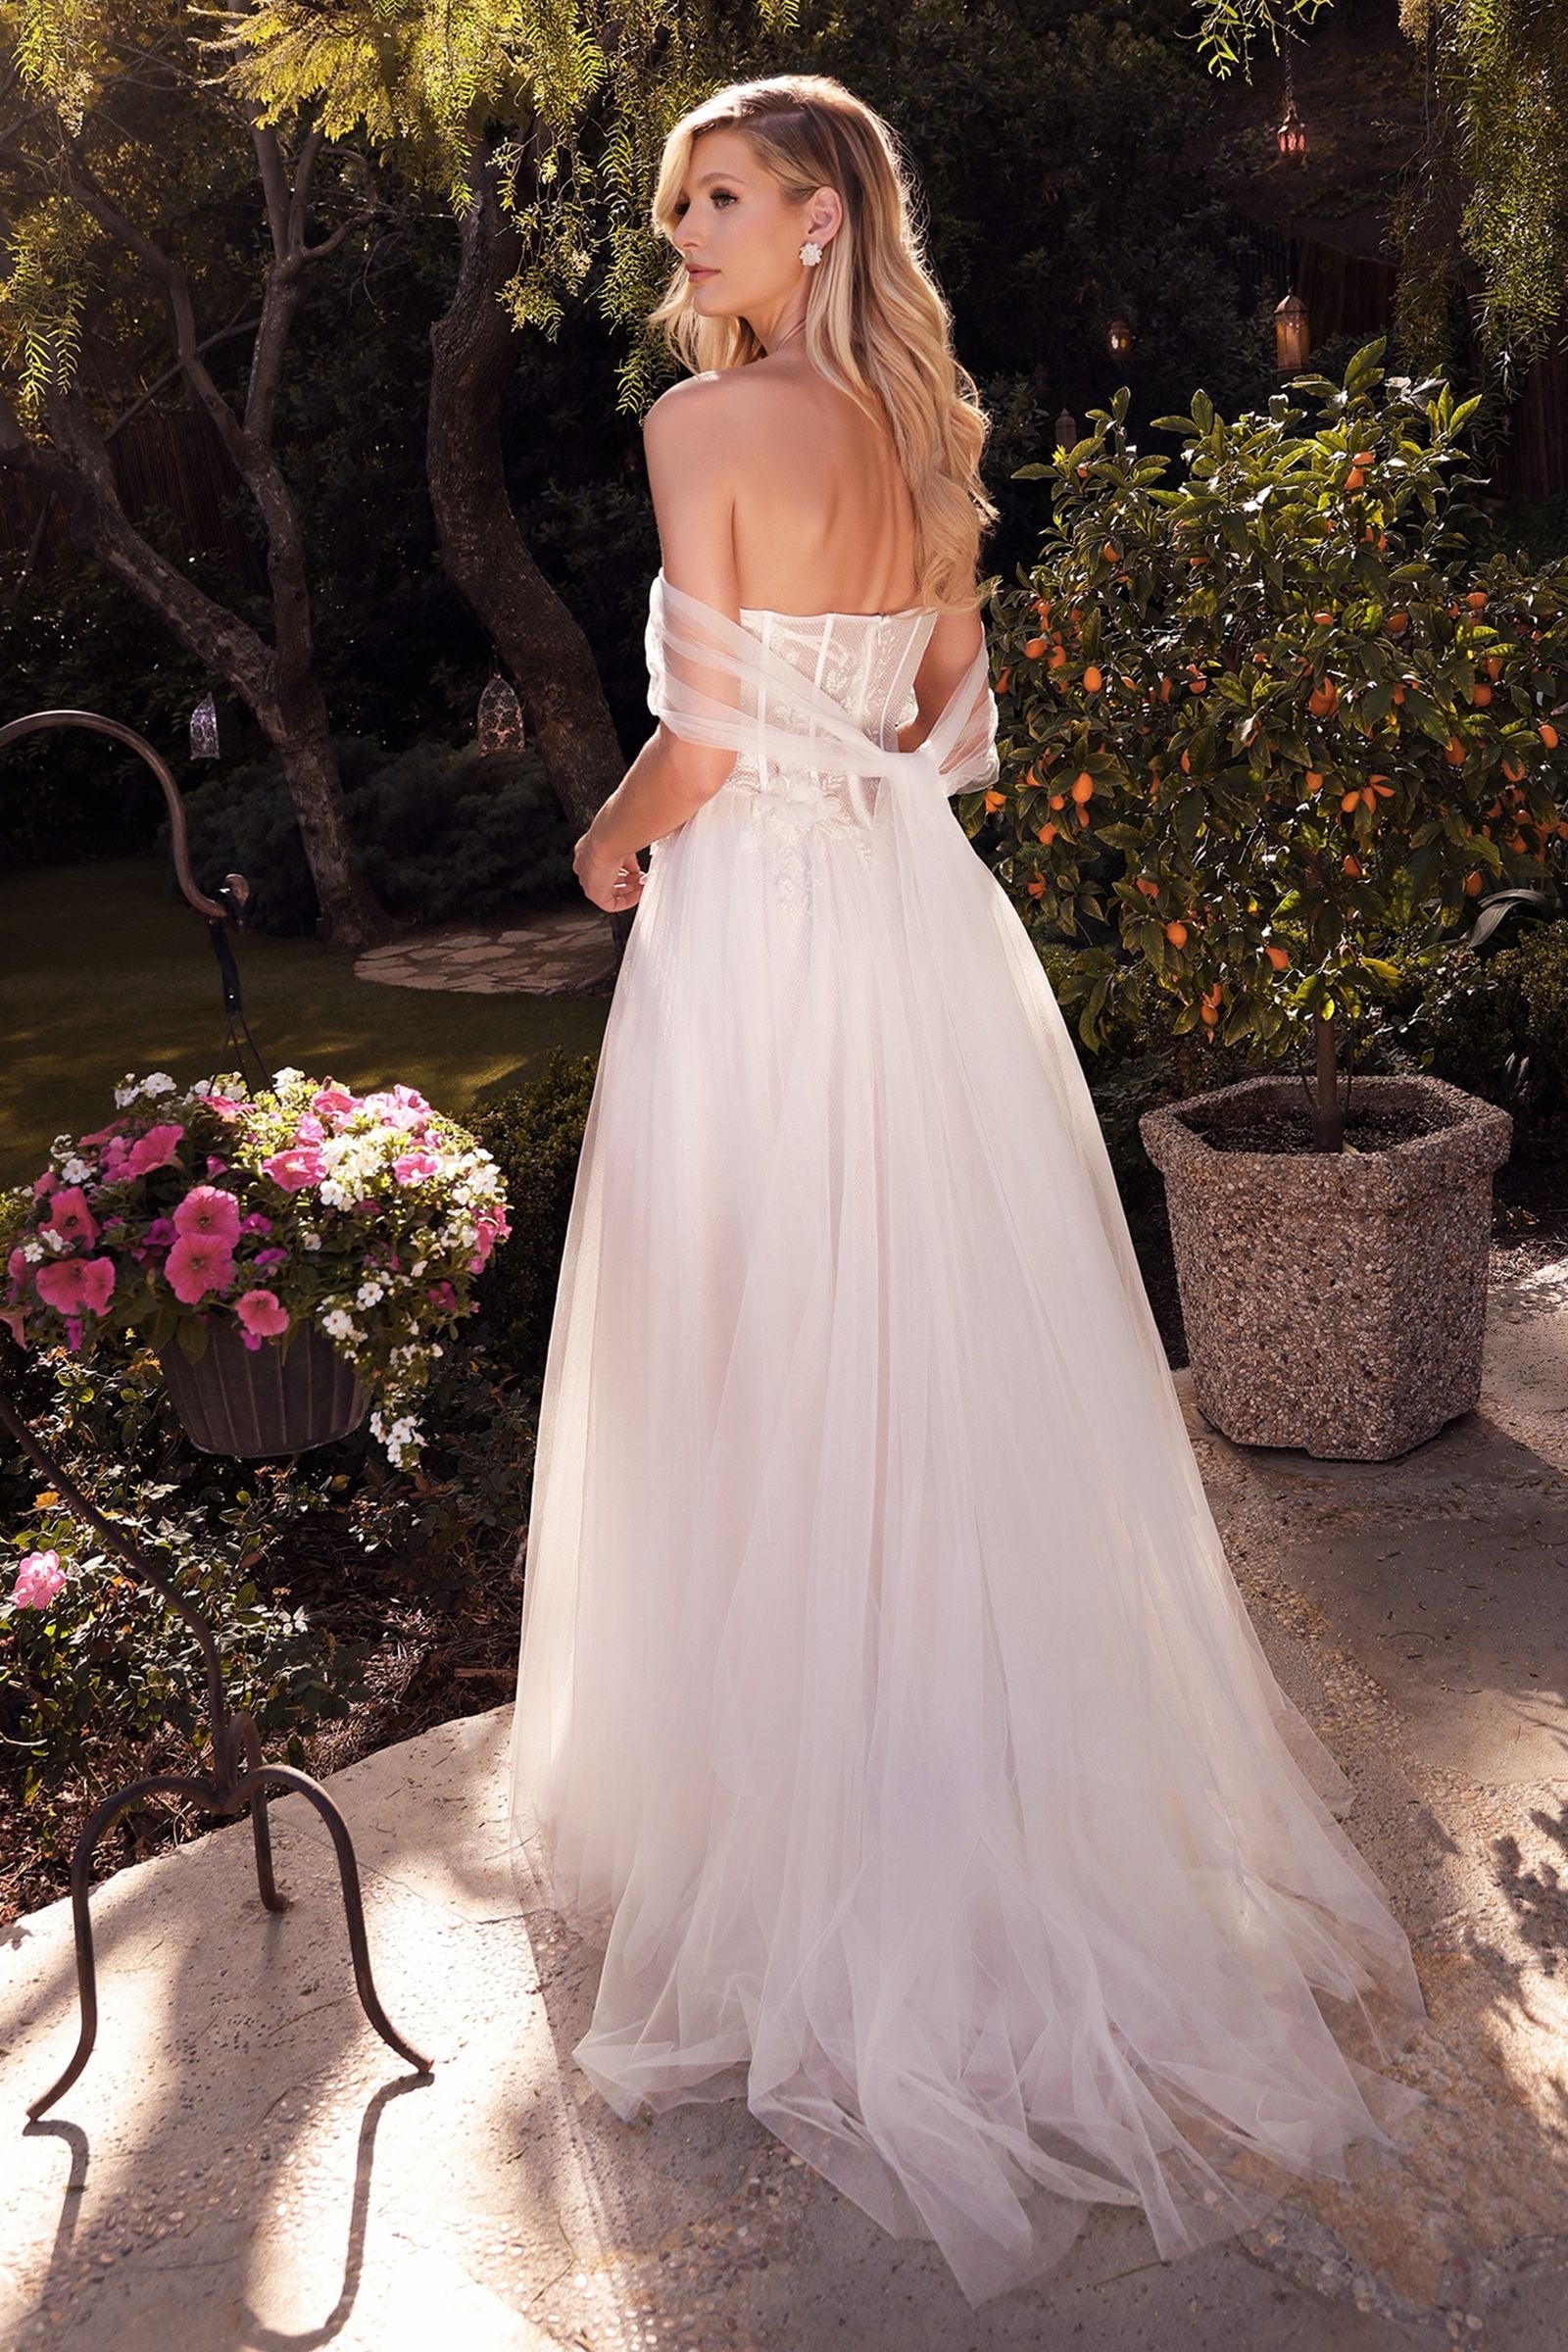 Elegant wedding dress with a corset bodice and sparkling glitter appliqué